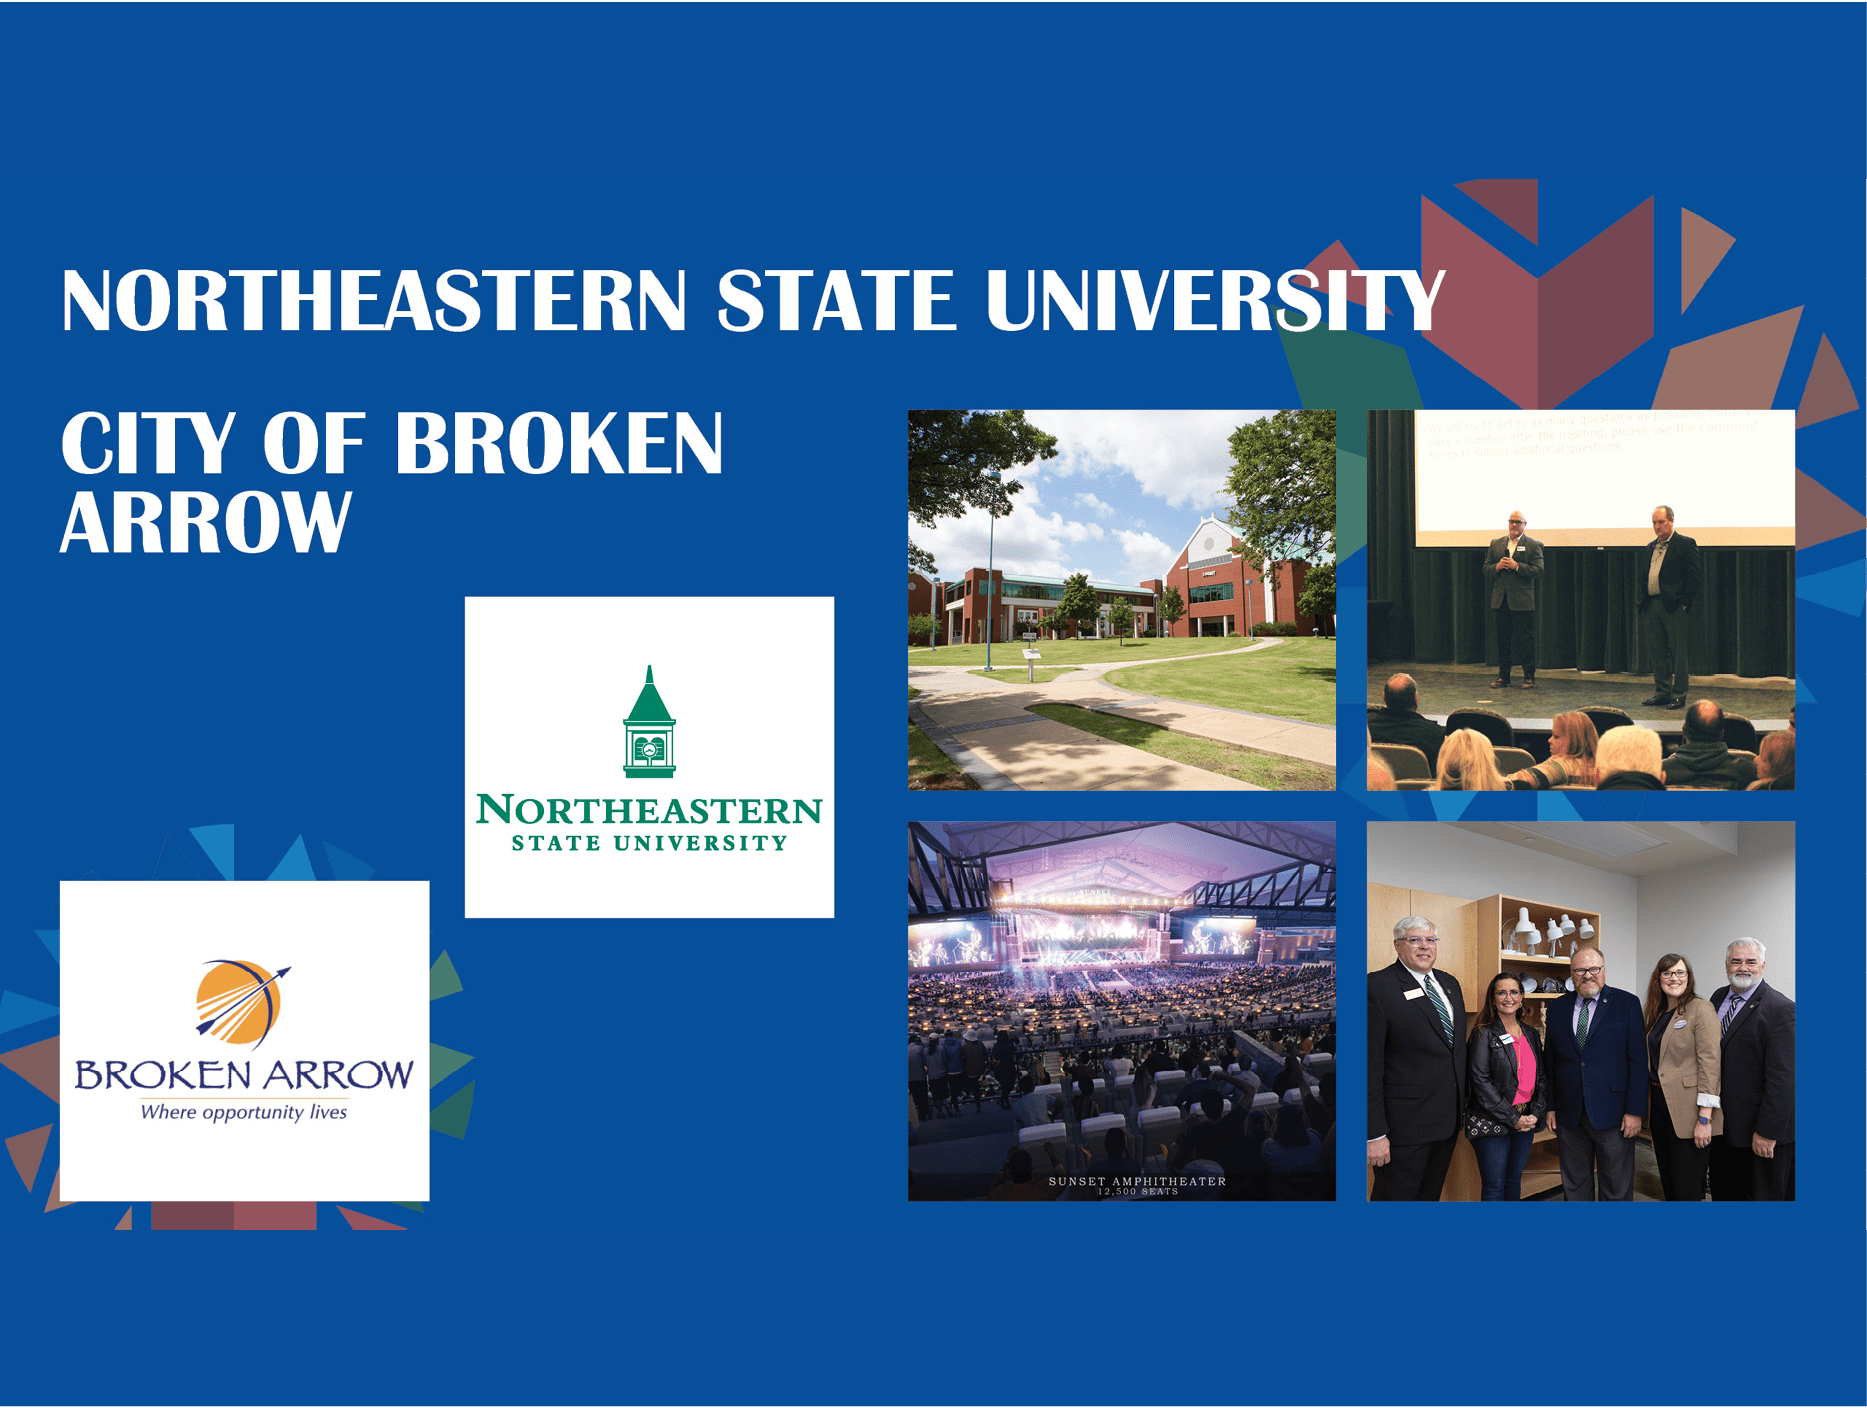 Northeastern State University and the City of Broken Arrow